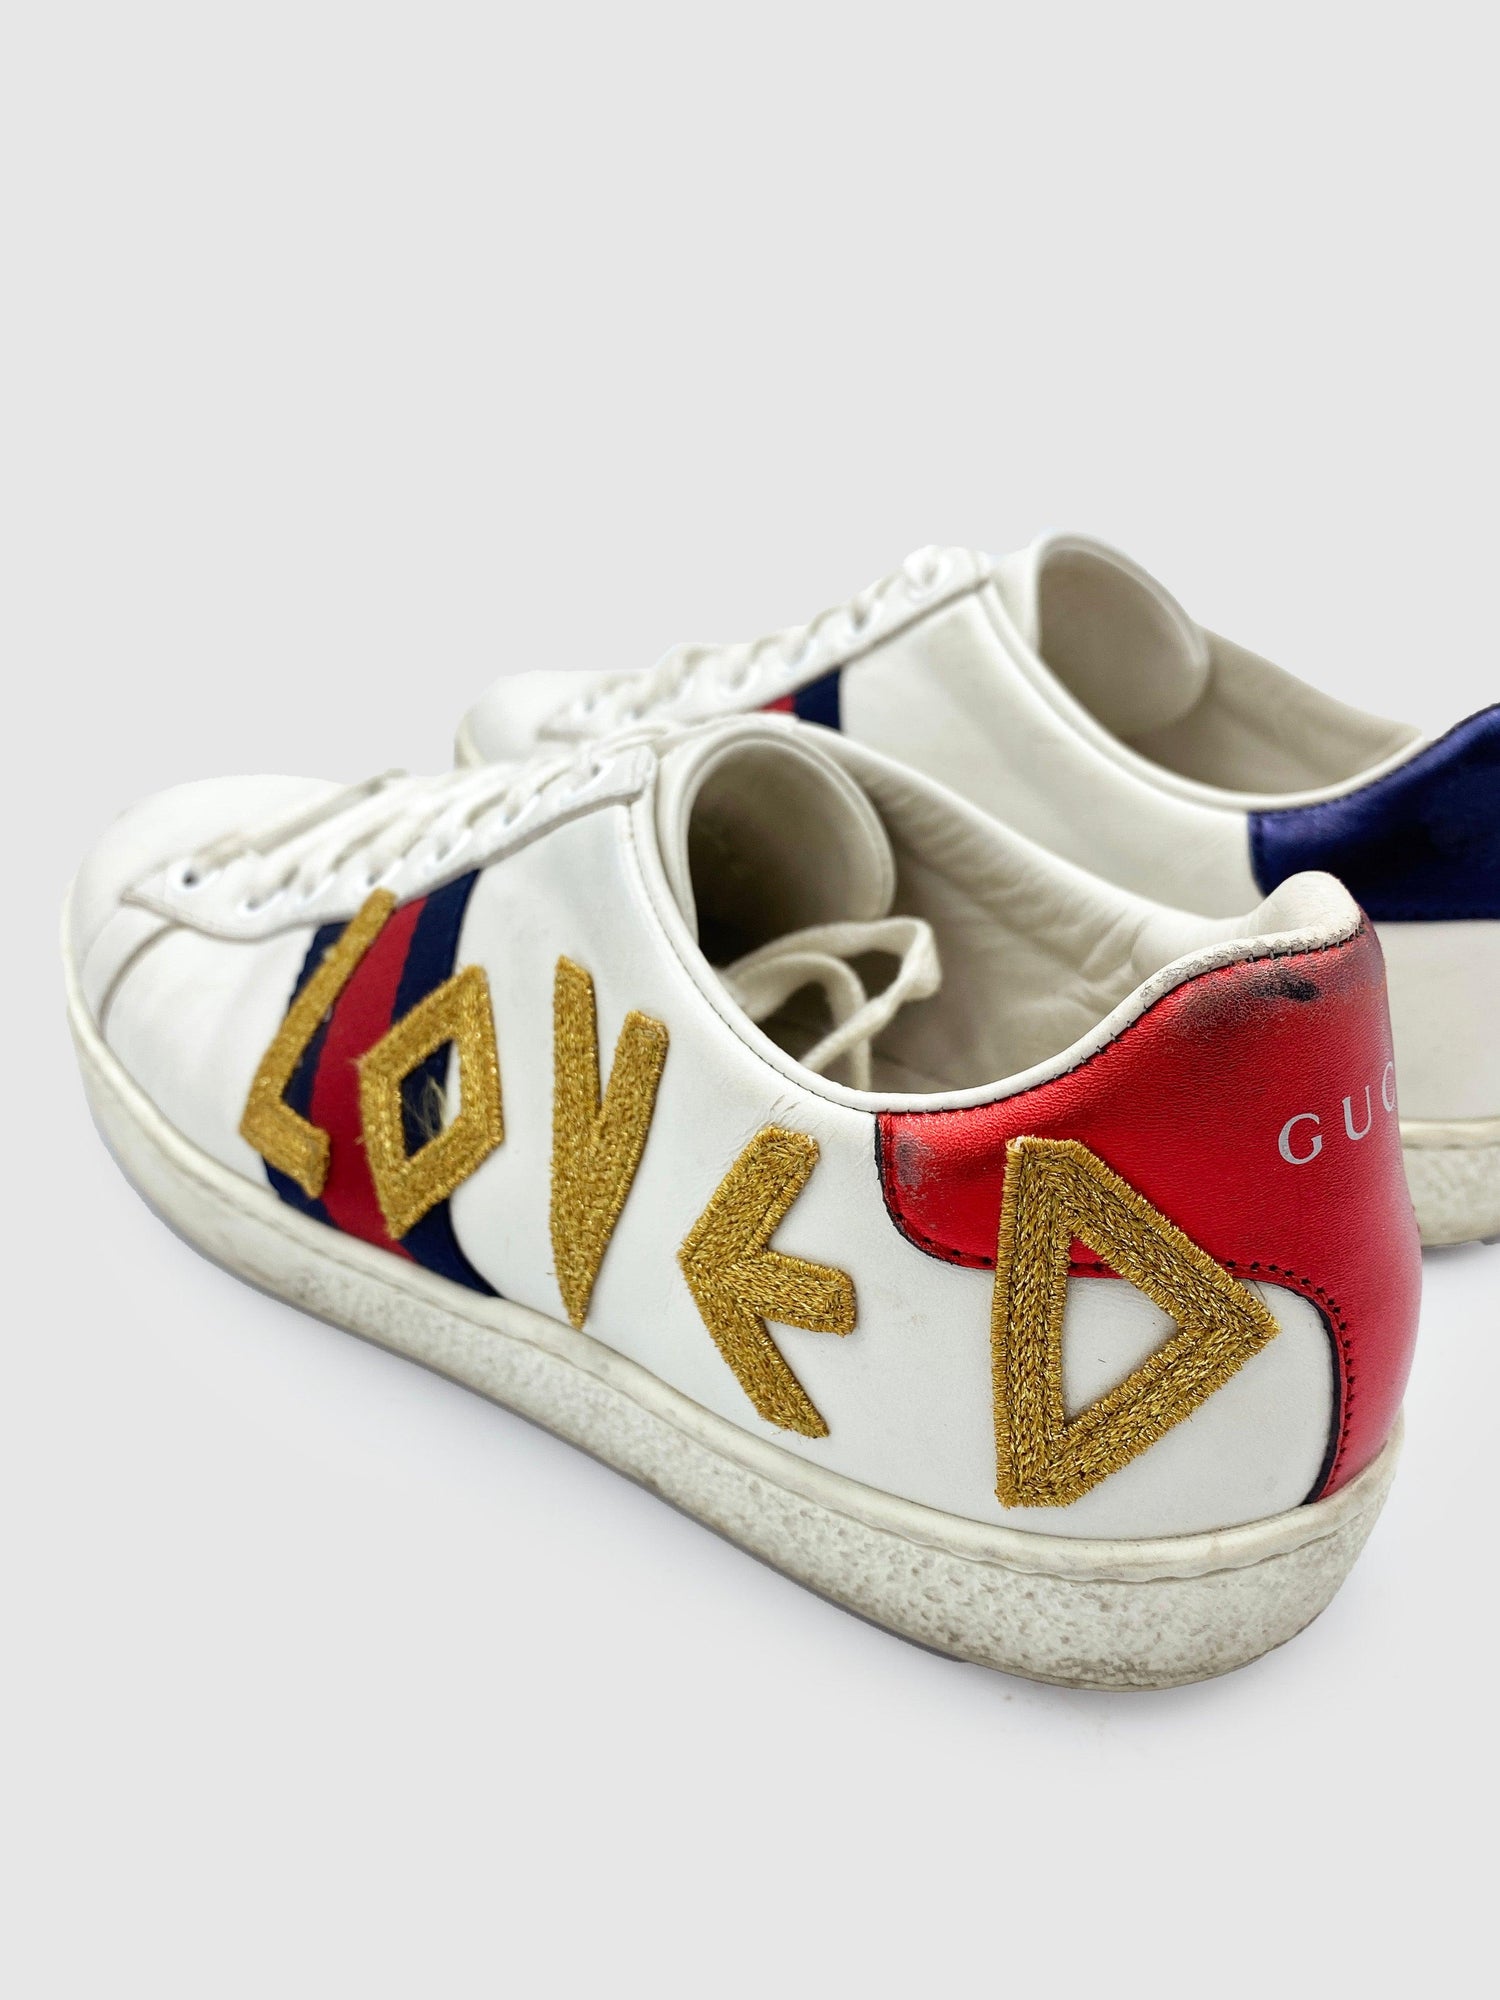 Gucci Ace Loved Sneaker - Size 38 - Second Nature Boutique